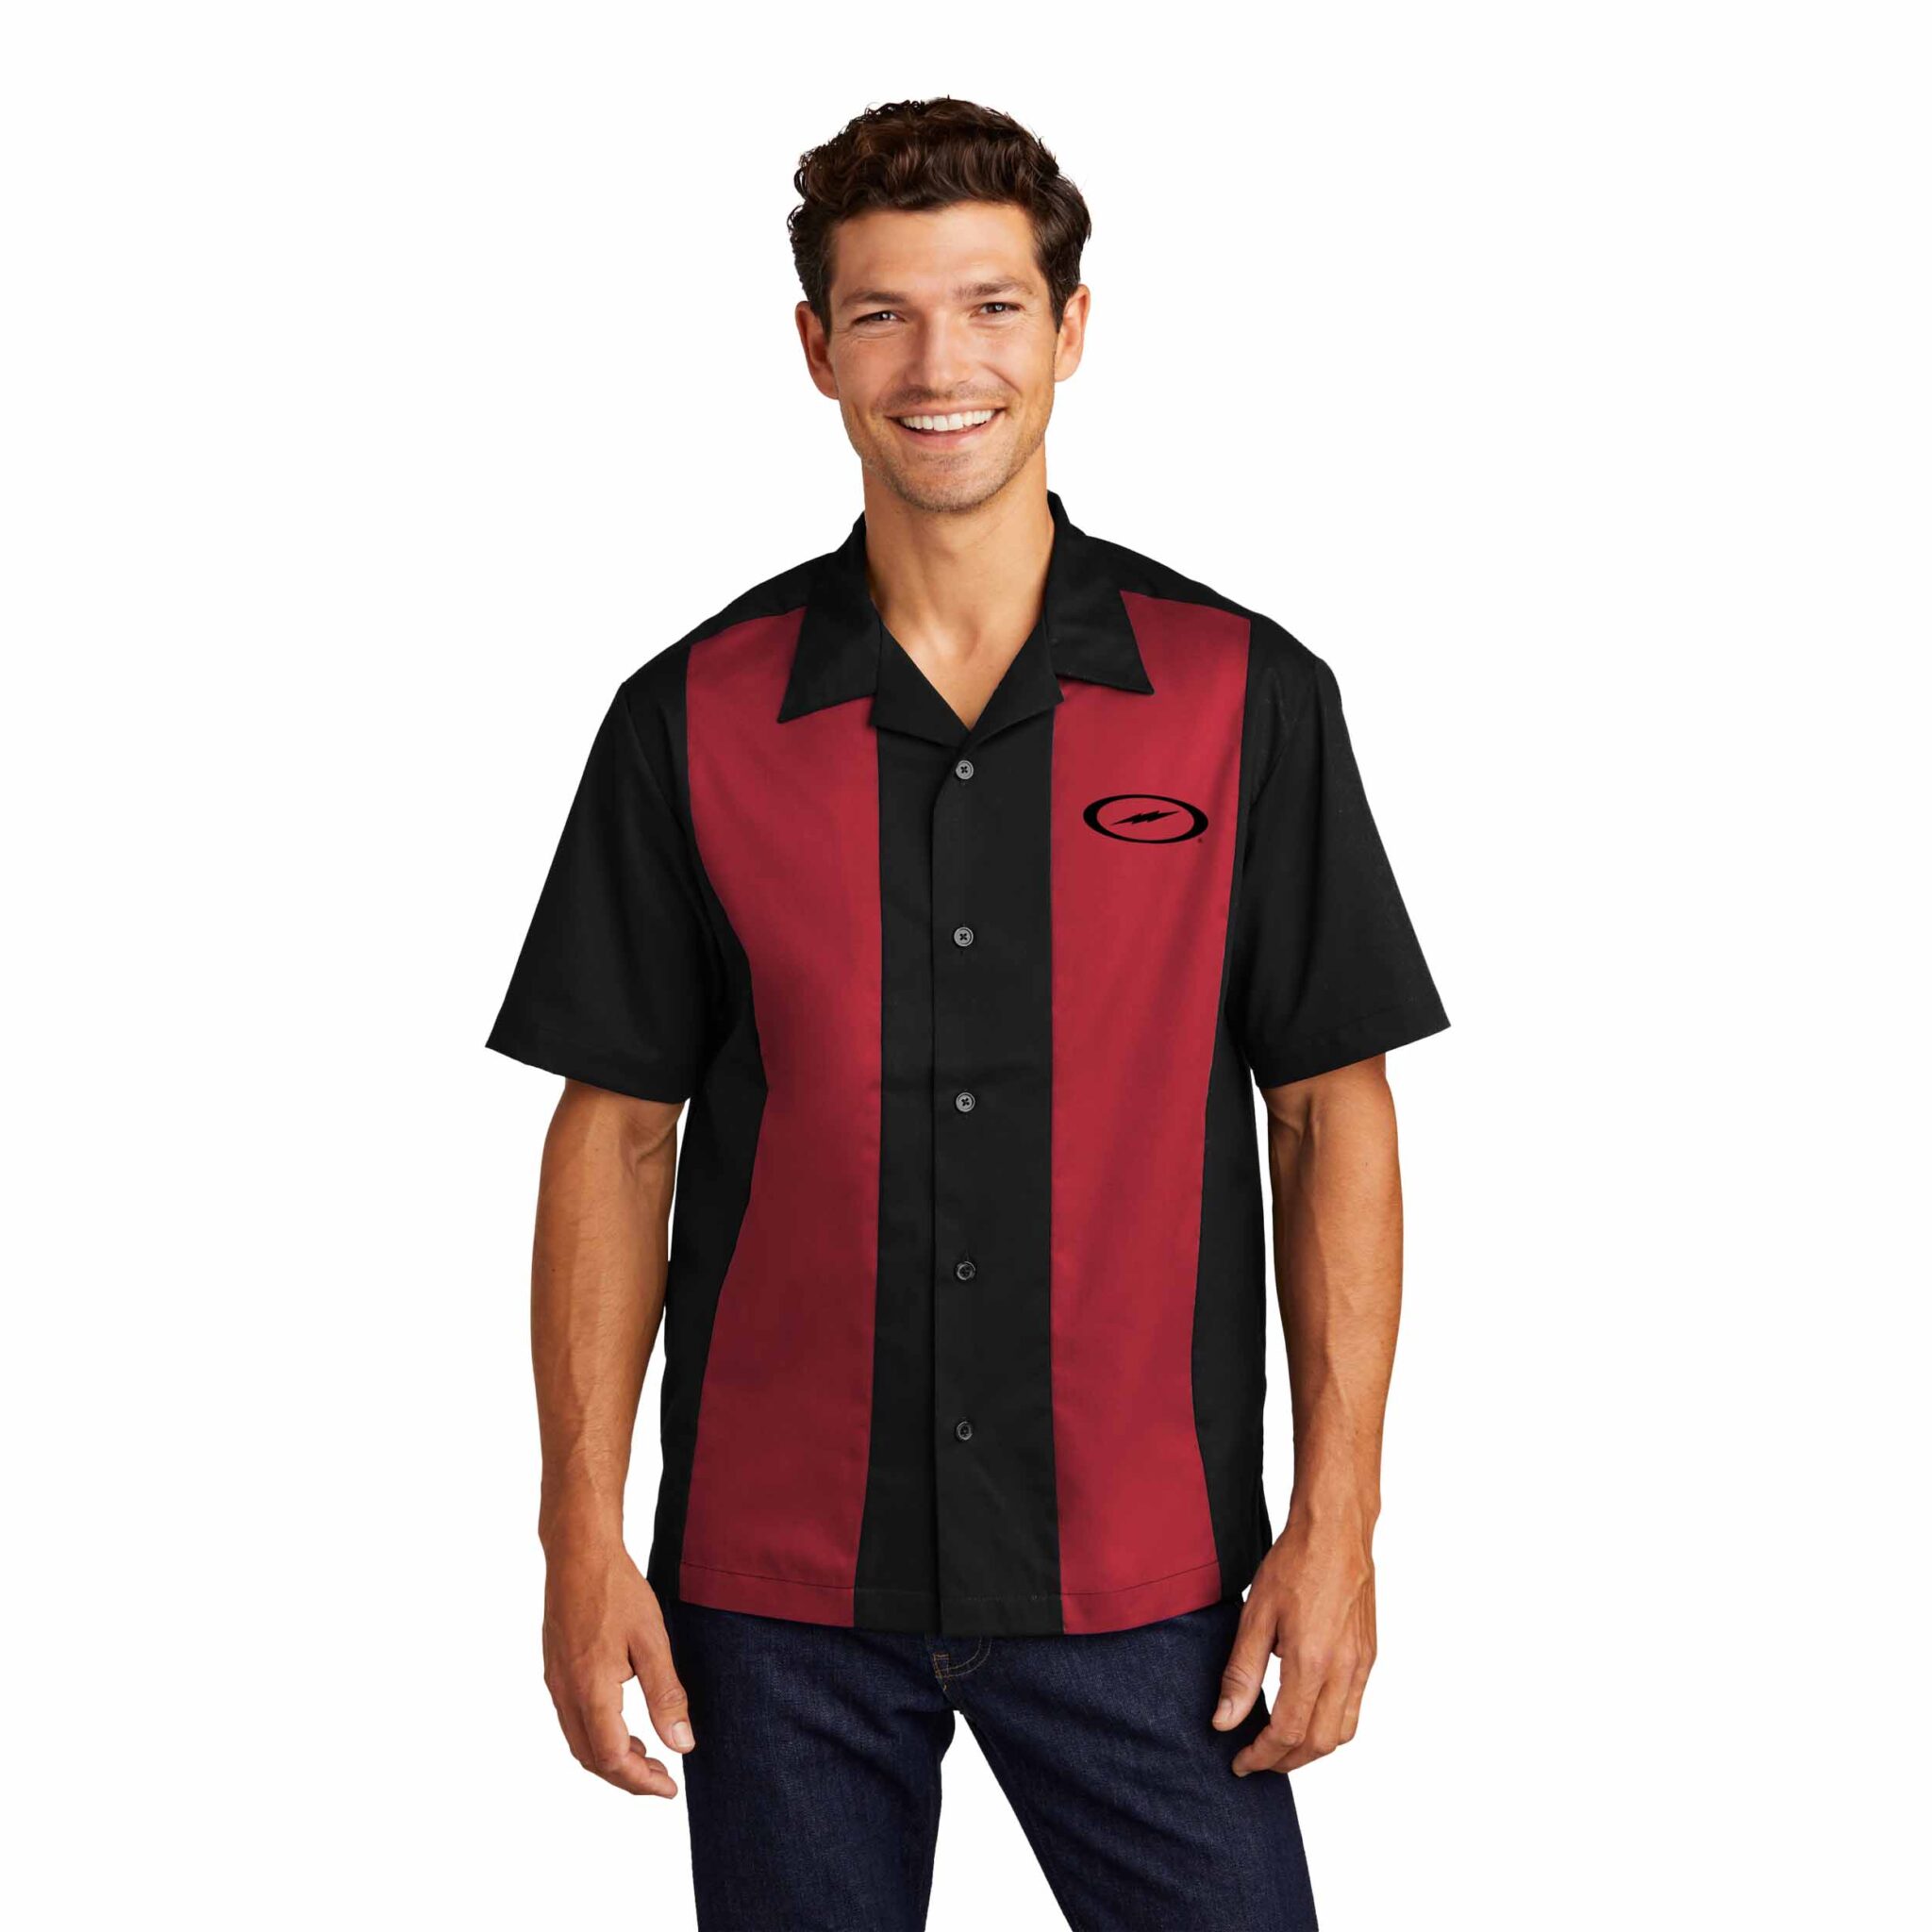 Storm Men's CoolWick Vintage Rockabilly Bowling Button Polo